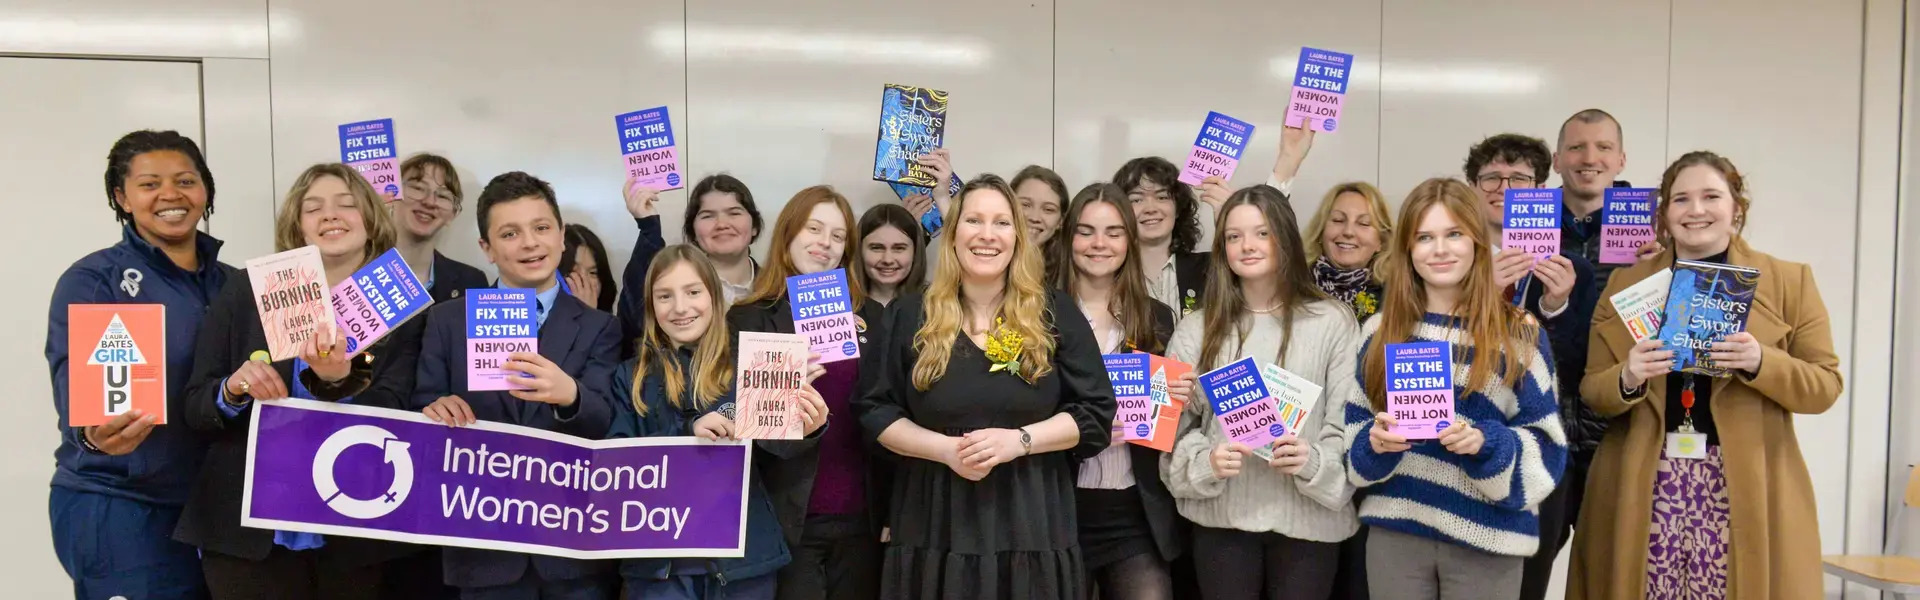 Laura Bates and Senior pupils standing with her book in their hands at Ibstock Place School, Roehampton, a private school near Richmond, Barnes, Putney, Kingston, & Wandsworth